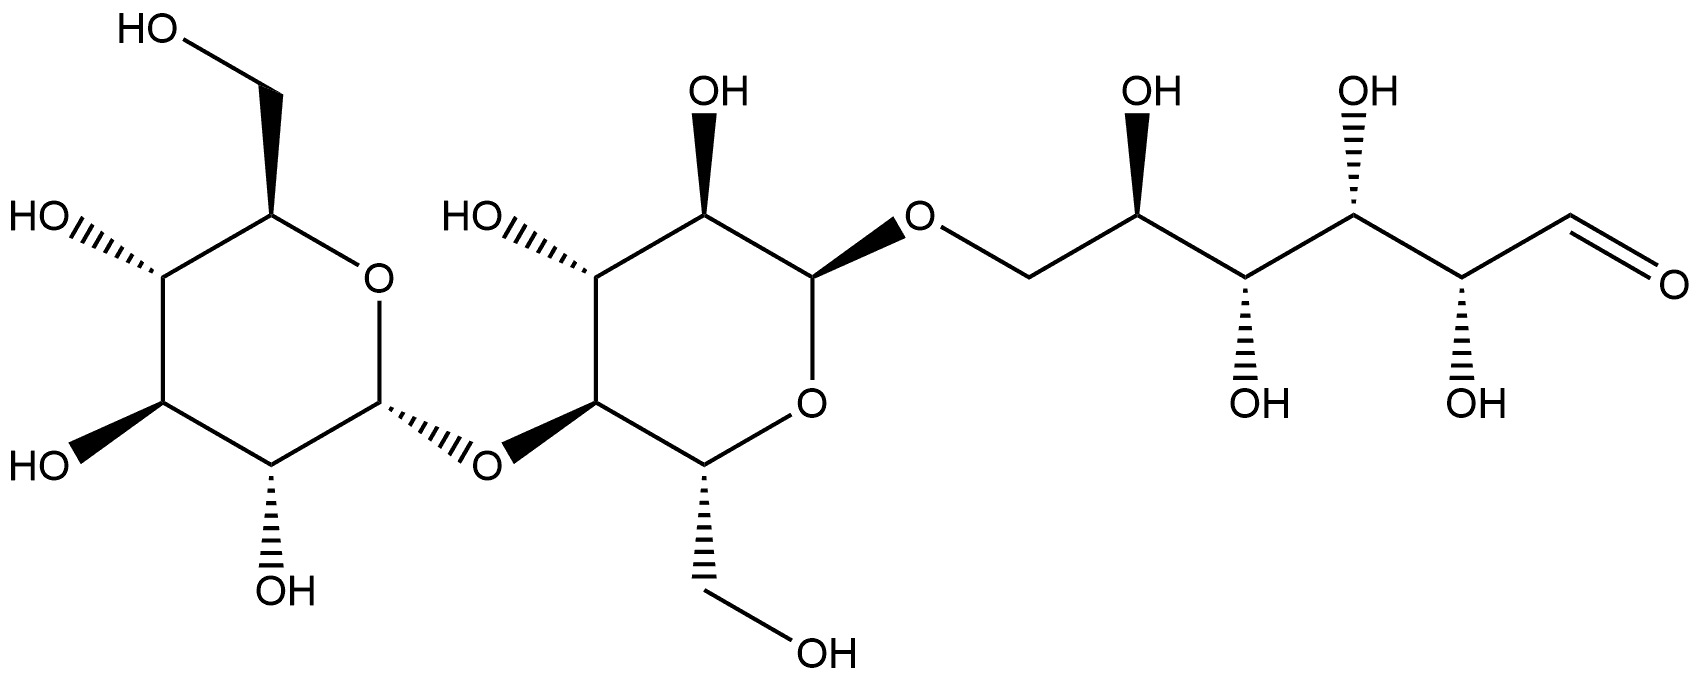 O-glucopyranosyl-(1-4)-O-glucopyranosyl-(1-6)glucopyranose Structure